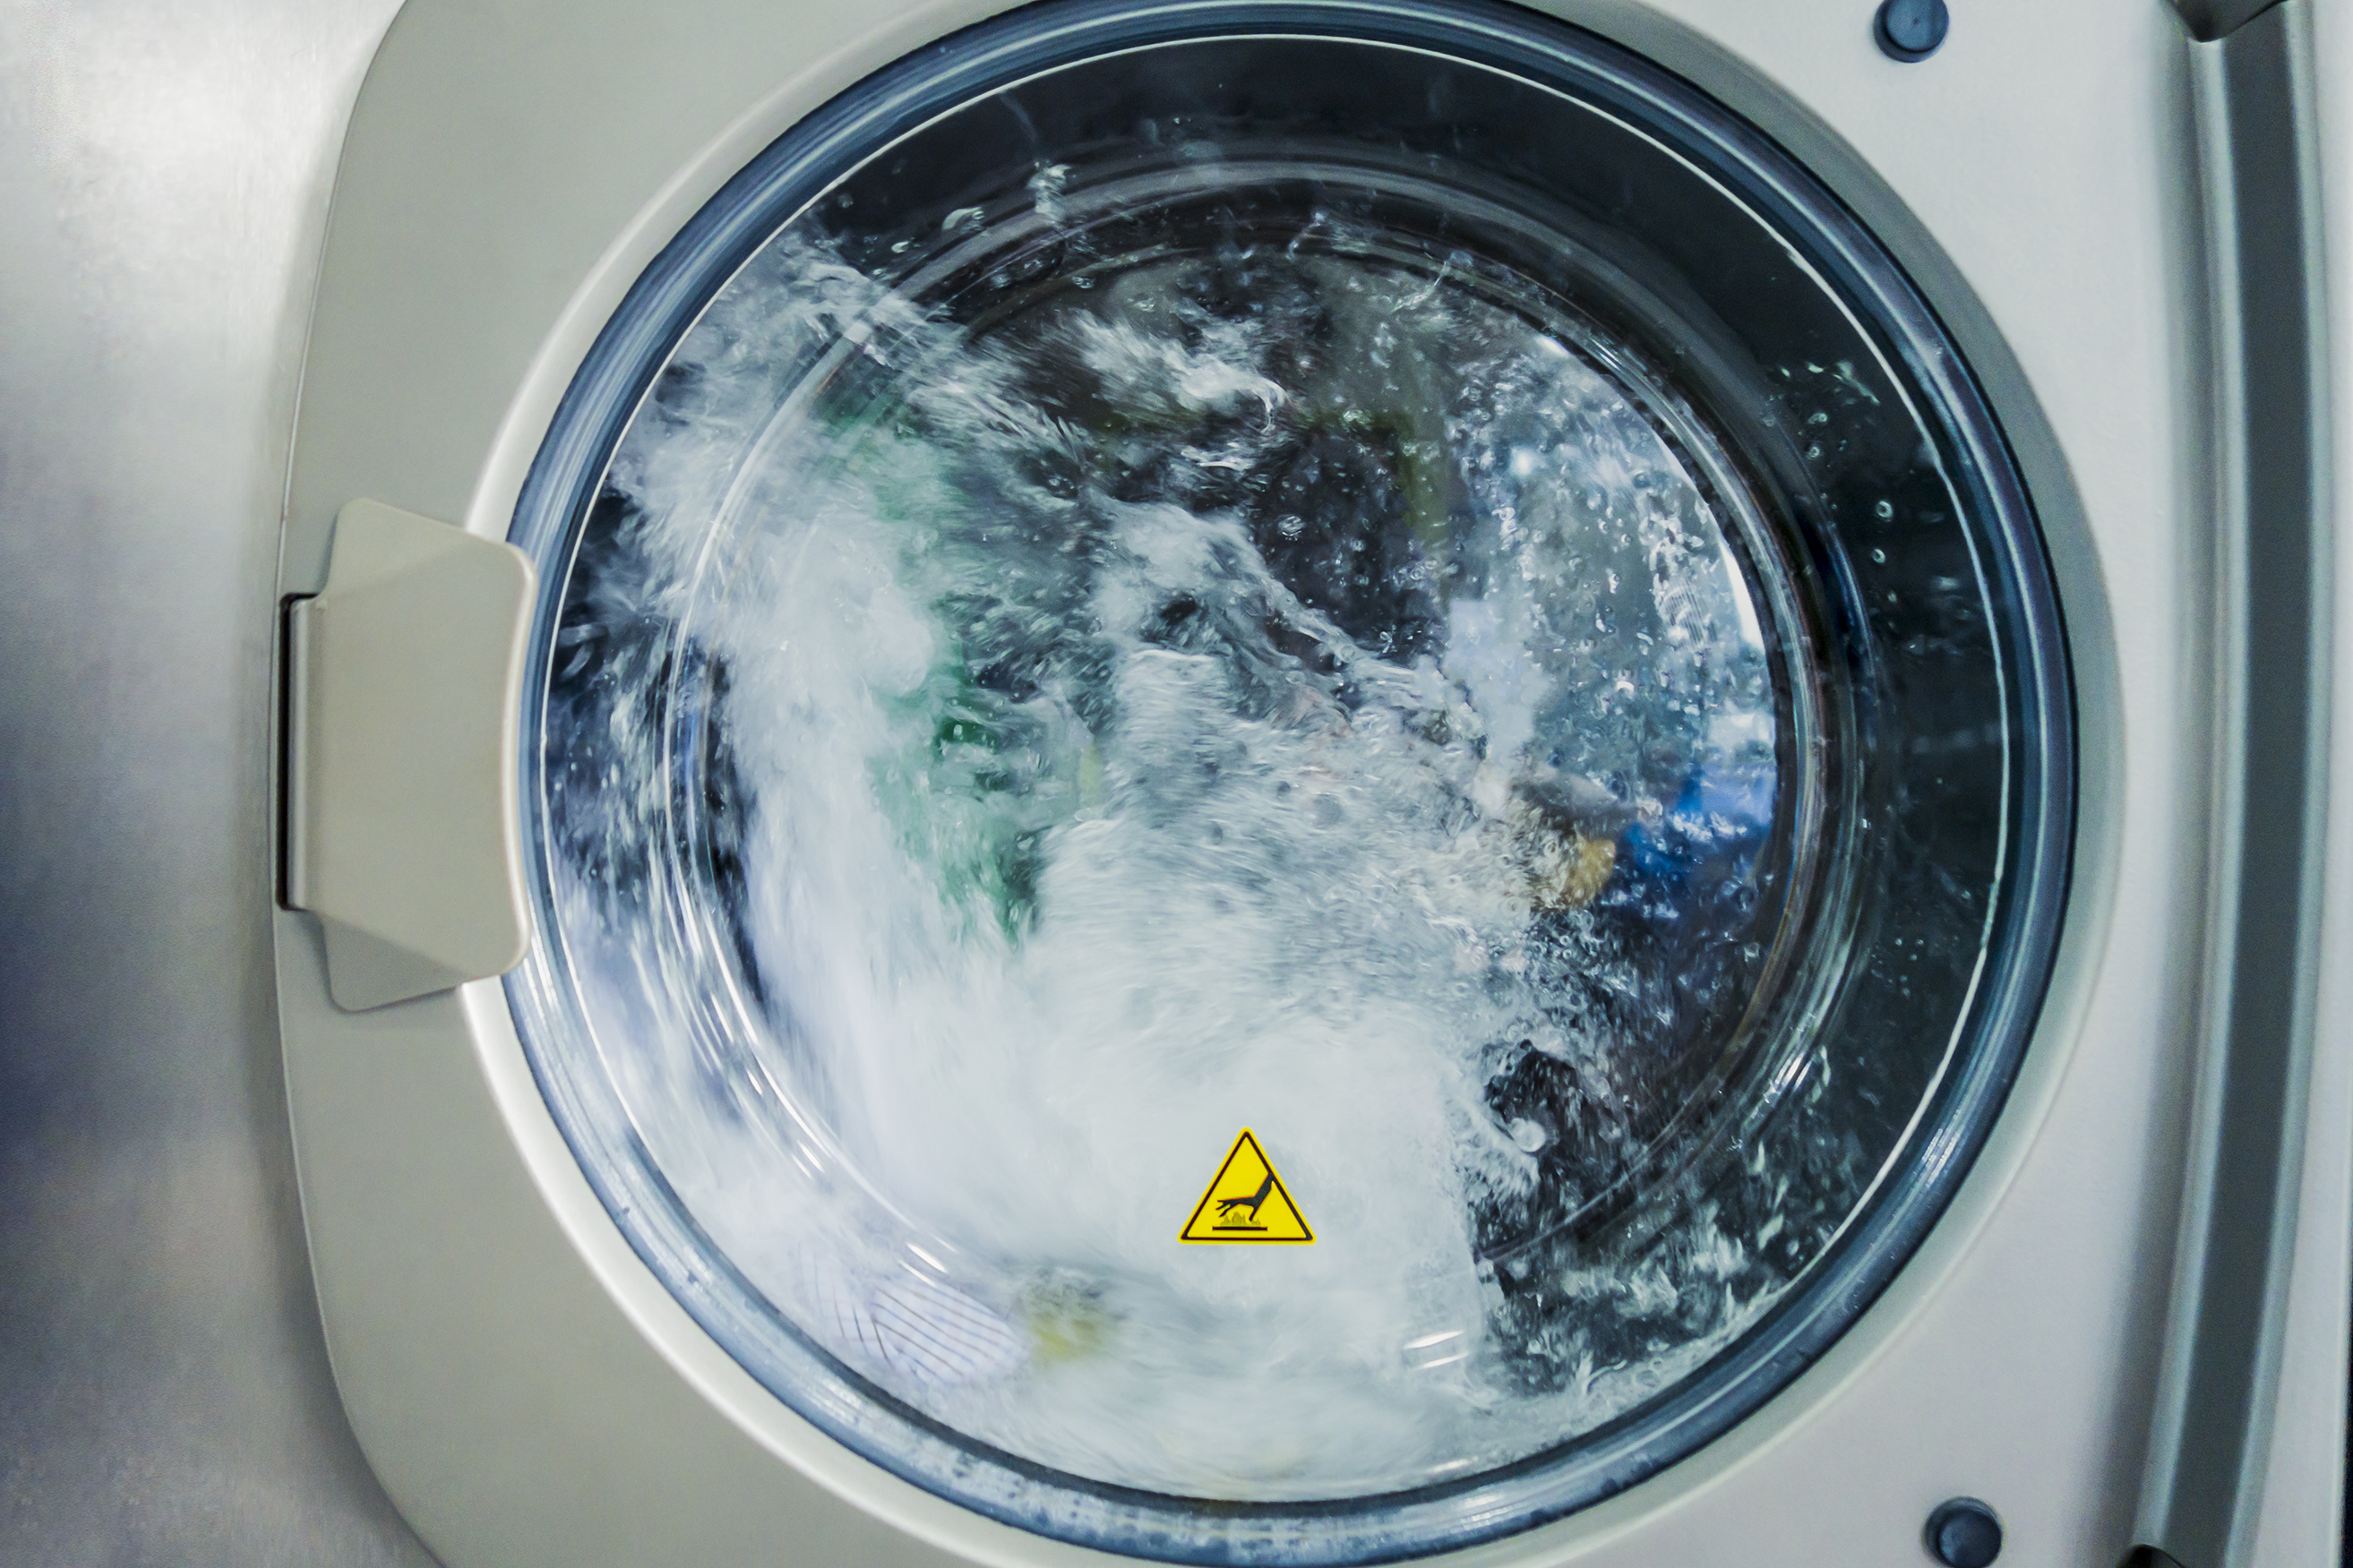 What should your business look for in a laundry equipment supplier?